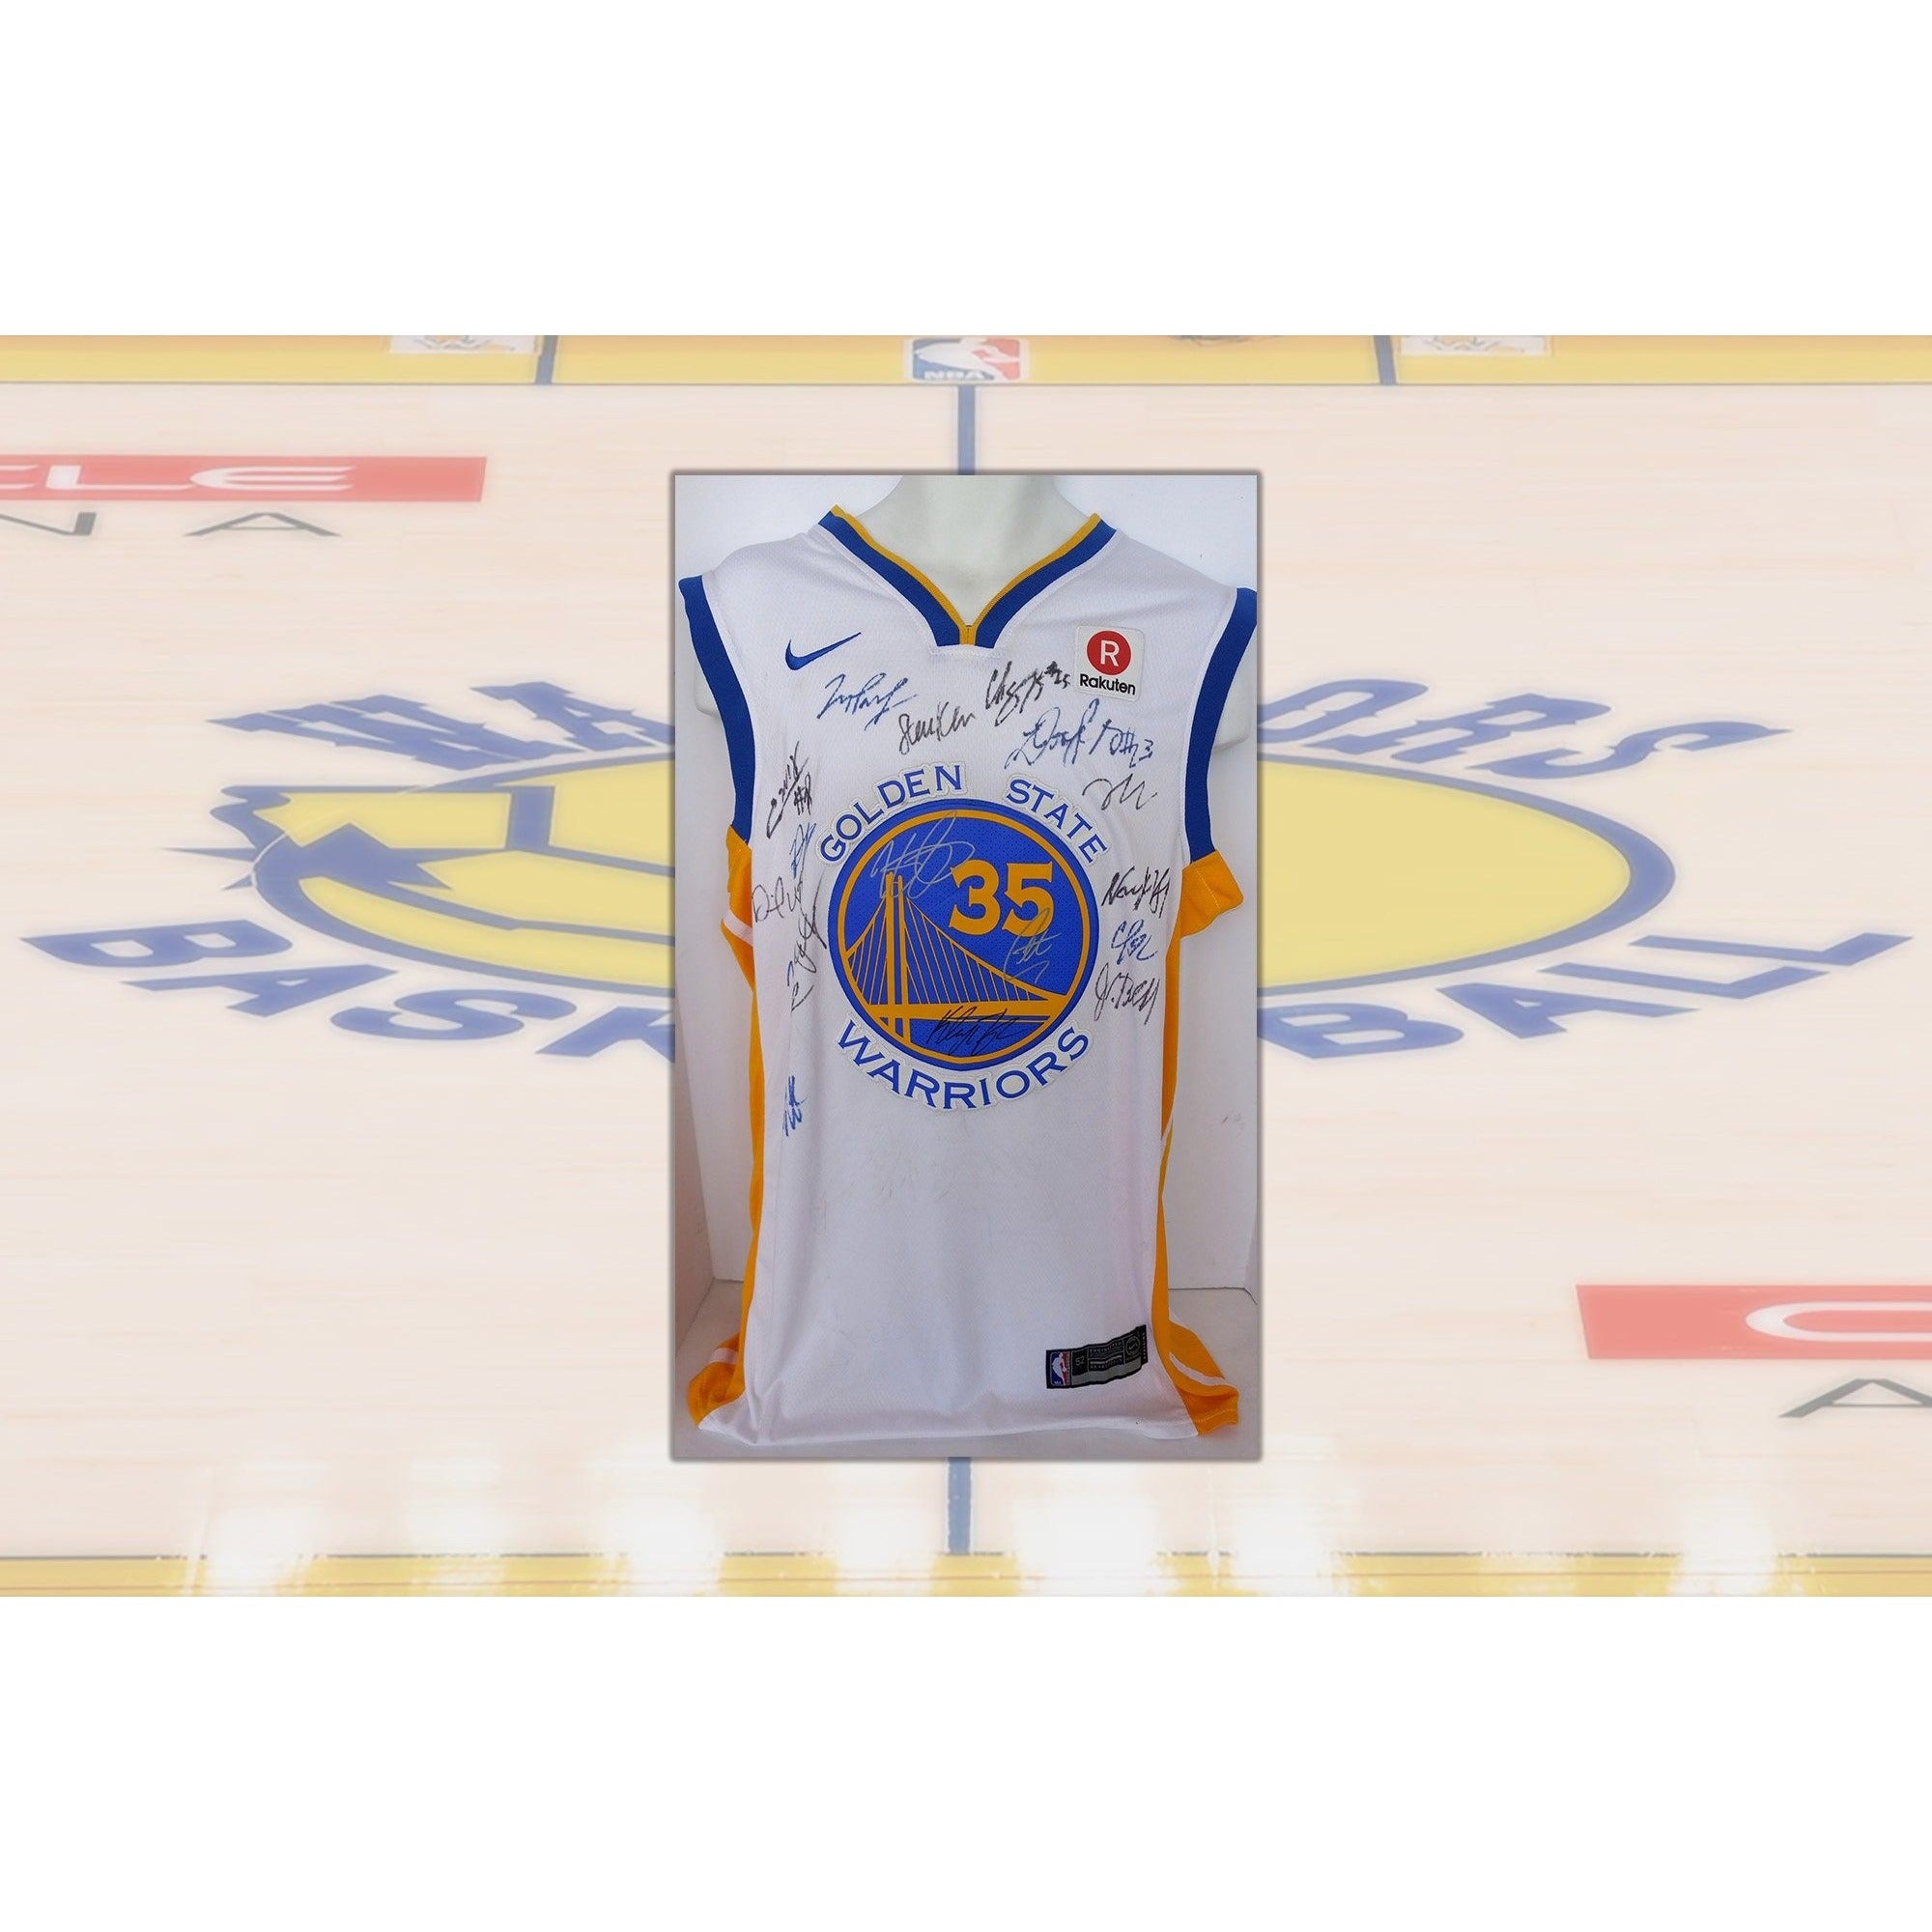 Golden State Warriors 2017-18 NBA champs Stephen Curry, Klay Thompson team signed jersey with proof